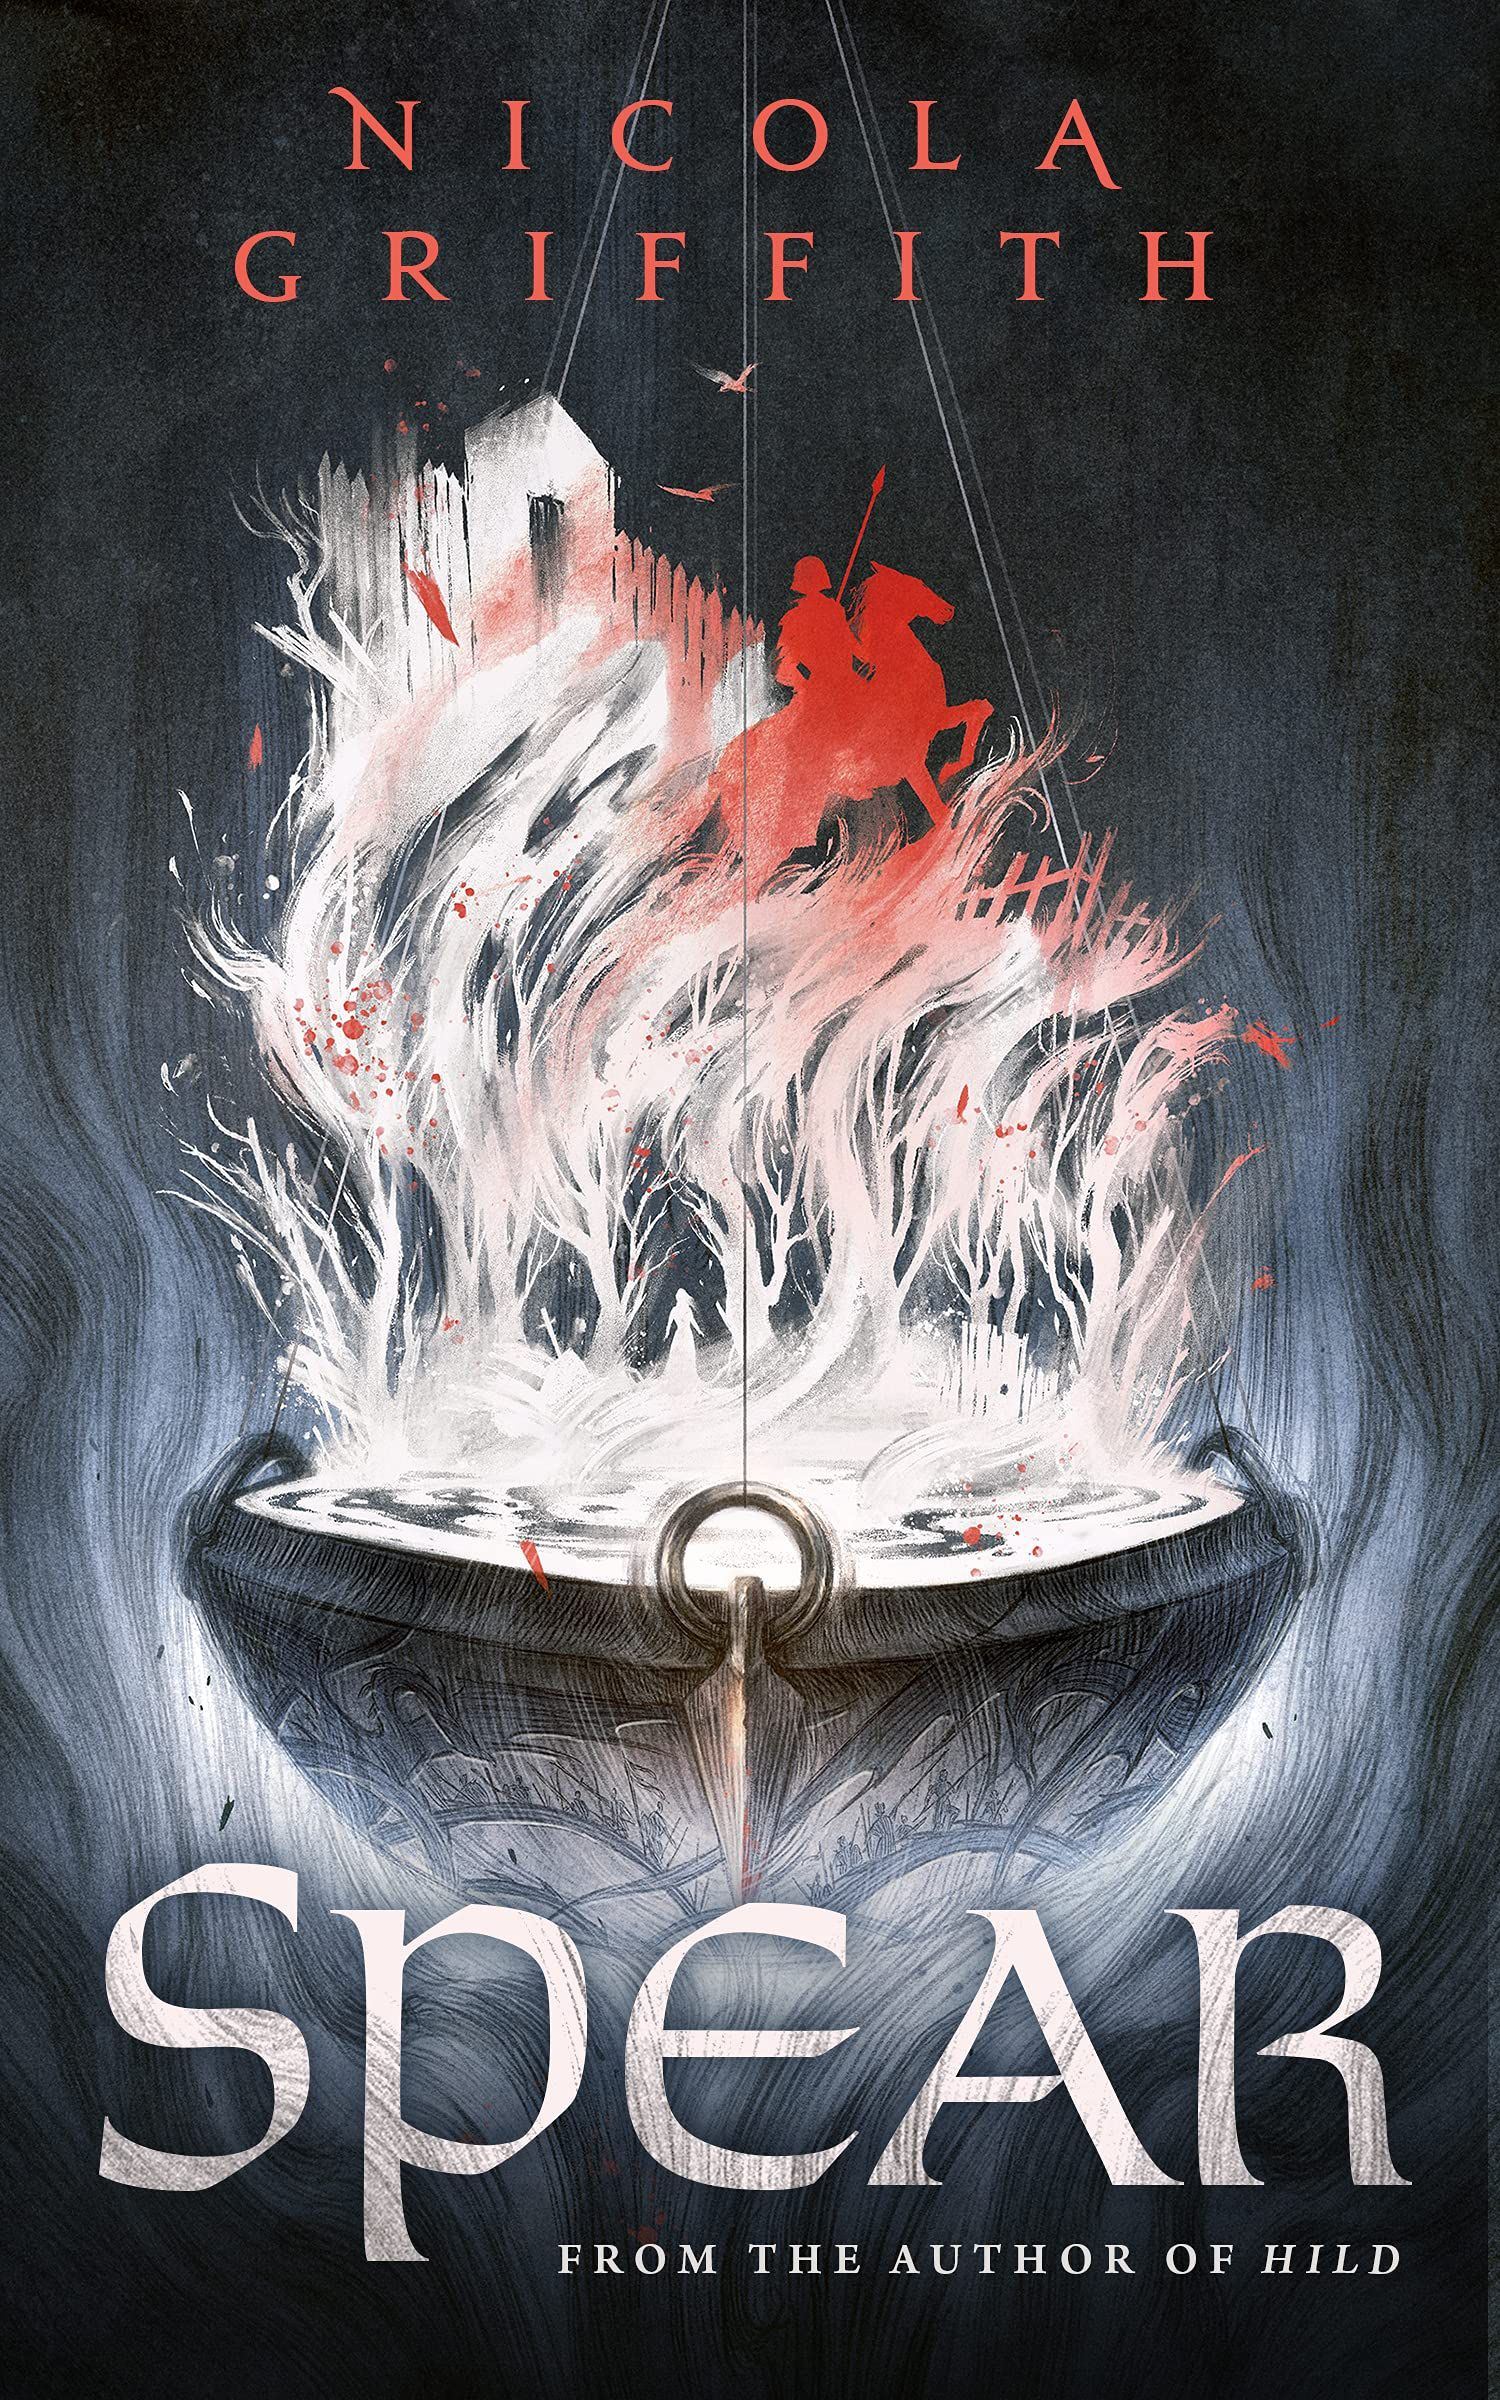 cover of Spear by Nicola Griffith, showing a red silhouette of a person on horseback emerging from a cluster of white trees emerging from a stone chalice